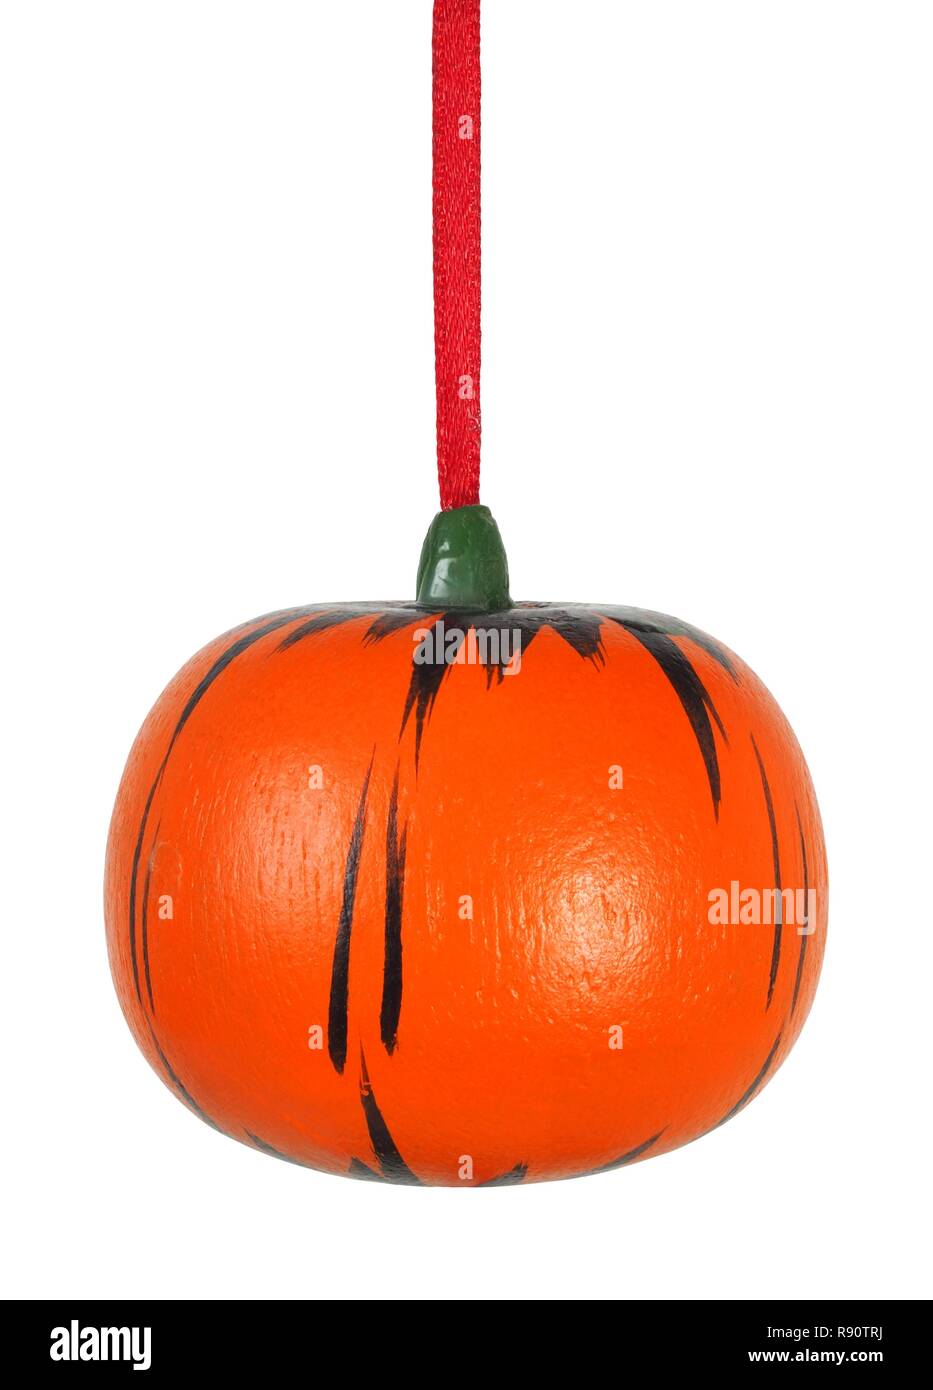 Pumpkin as Christmas tree decoration isolated on white background Stock Photo